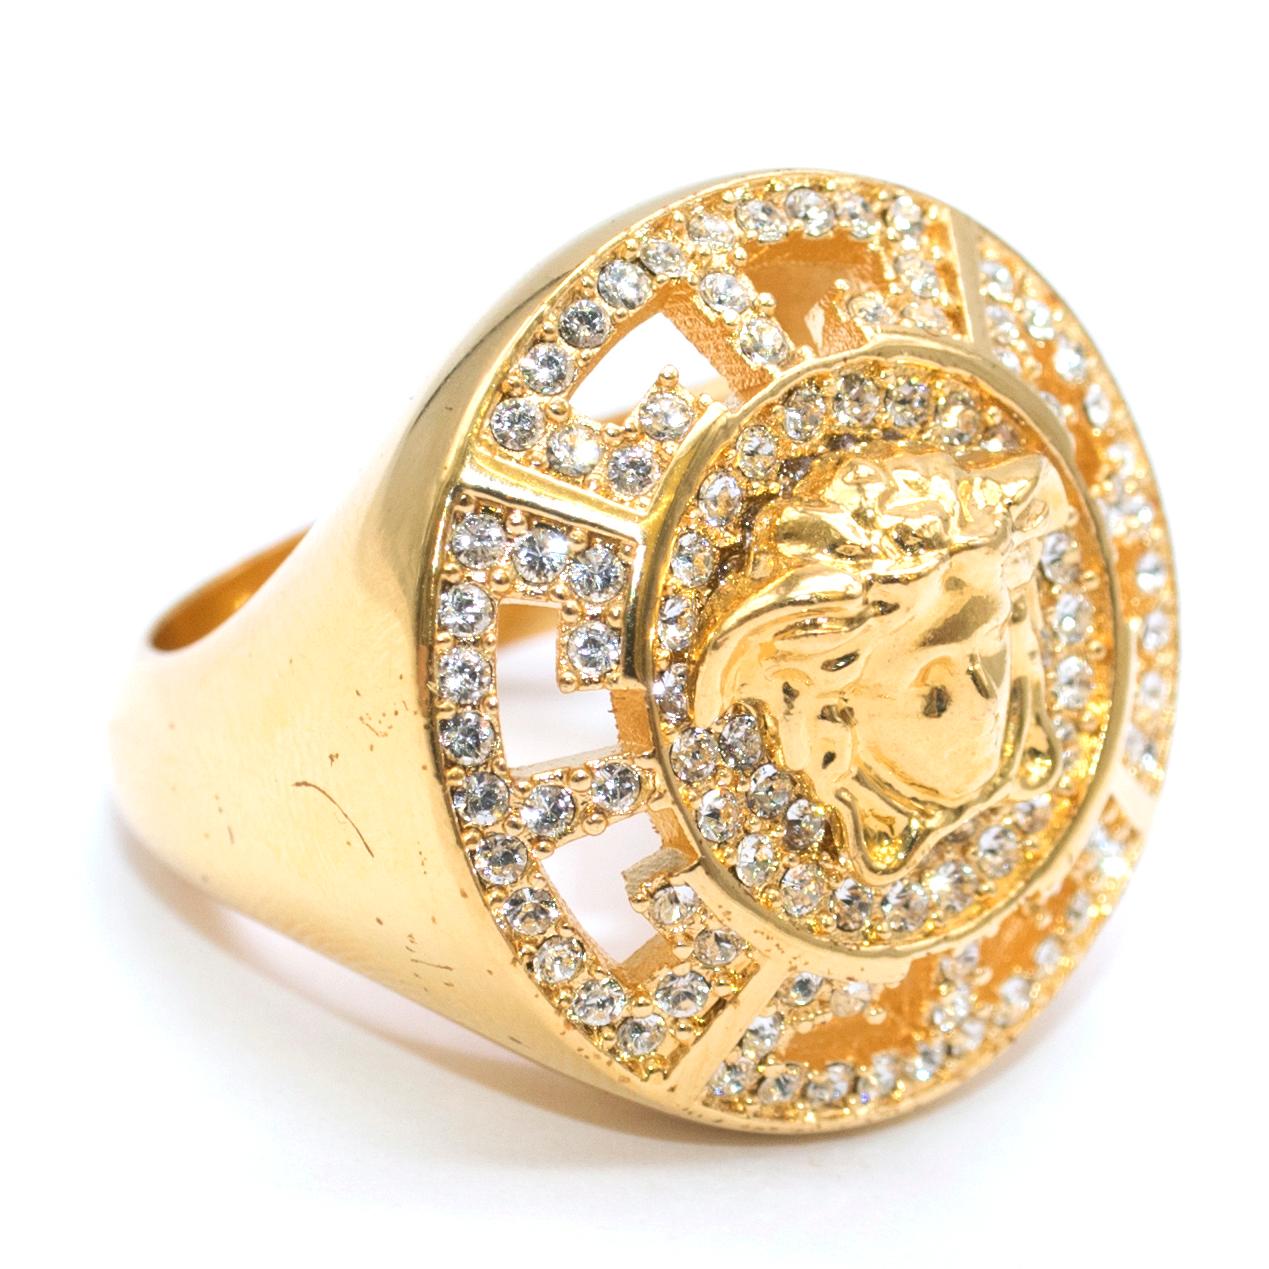 Versace Crystal Embellished Medusa Head Ring 

- Gold tone Greek & Medusa ring 
- Greek detail embellished with white crystals

Matching pairing is available

Please note, these items are pre-owned and may show some signs of storage, even when